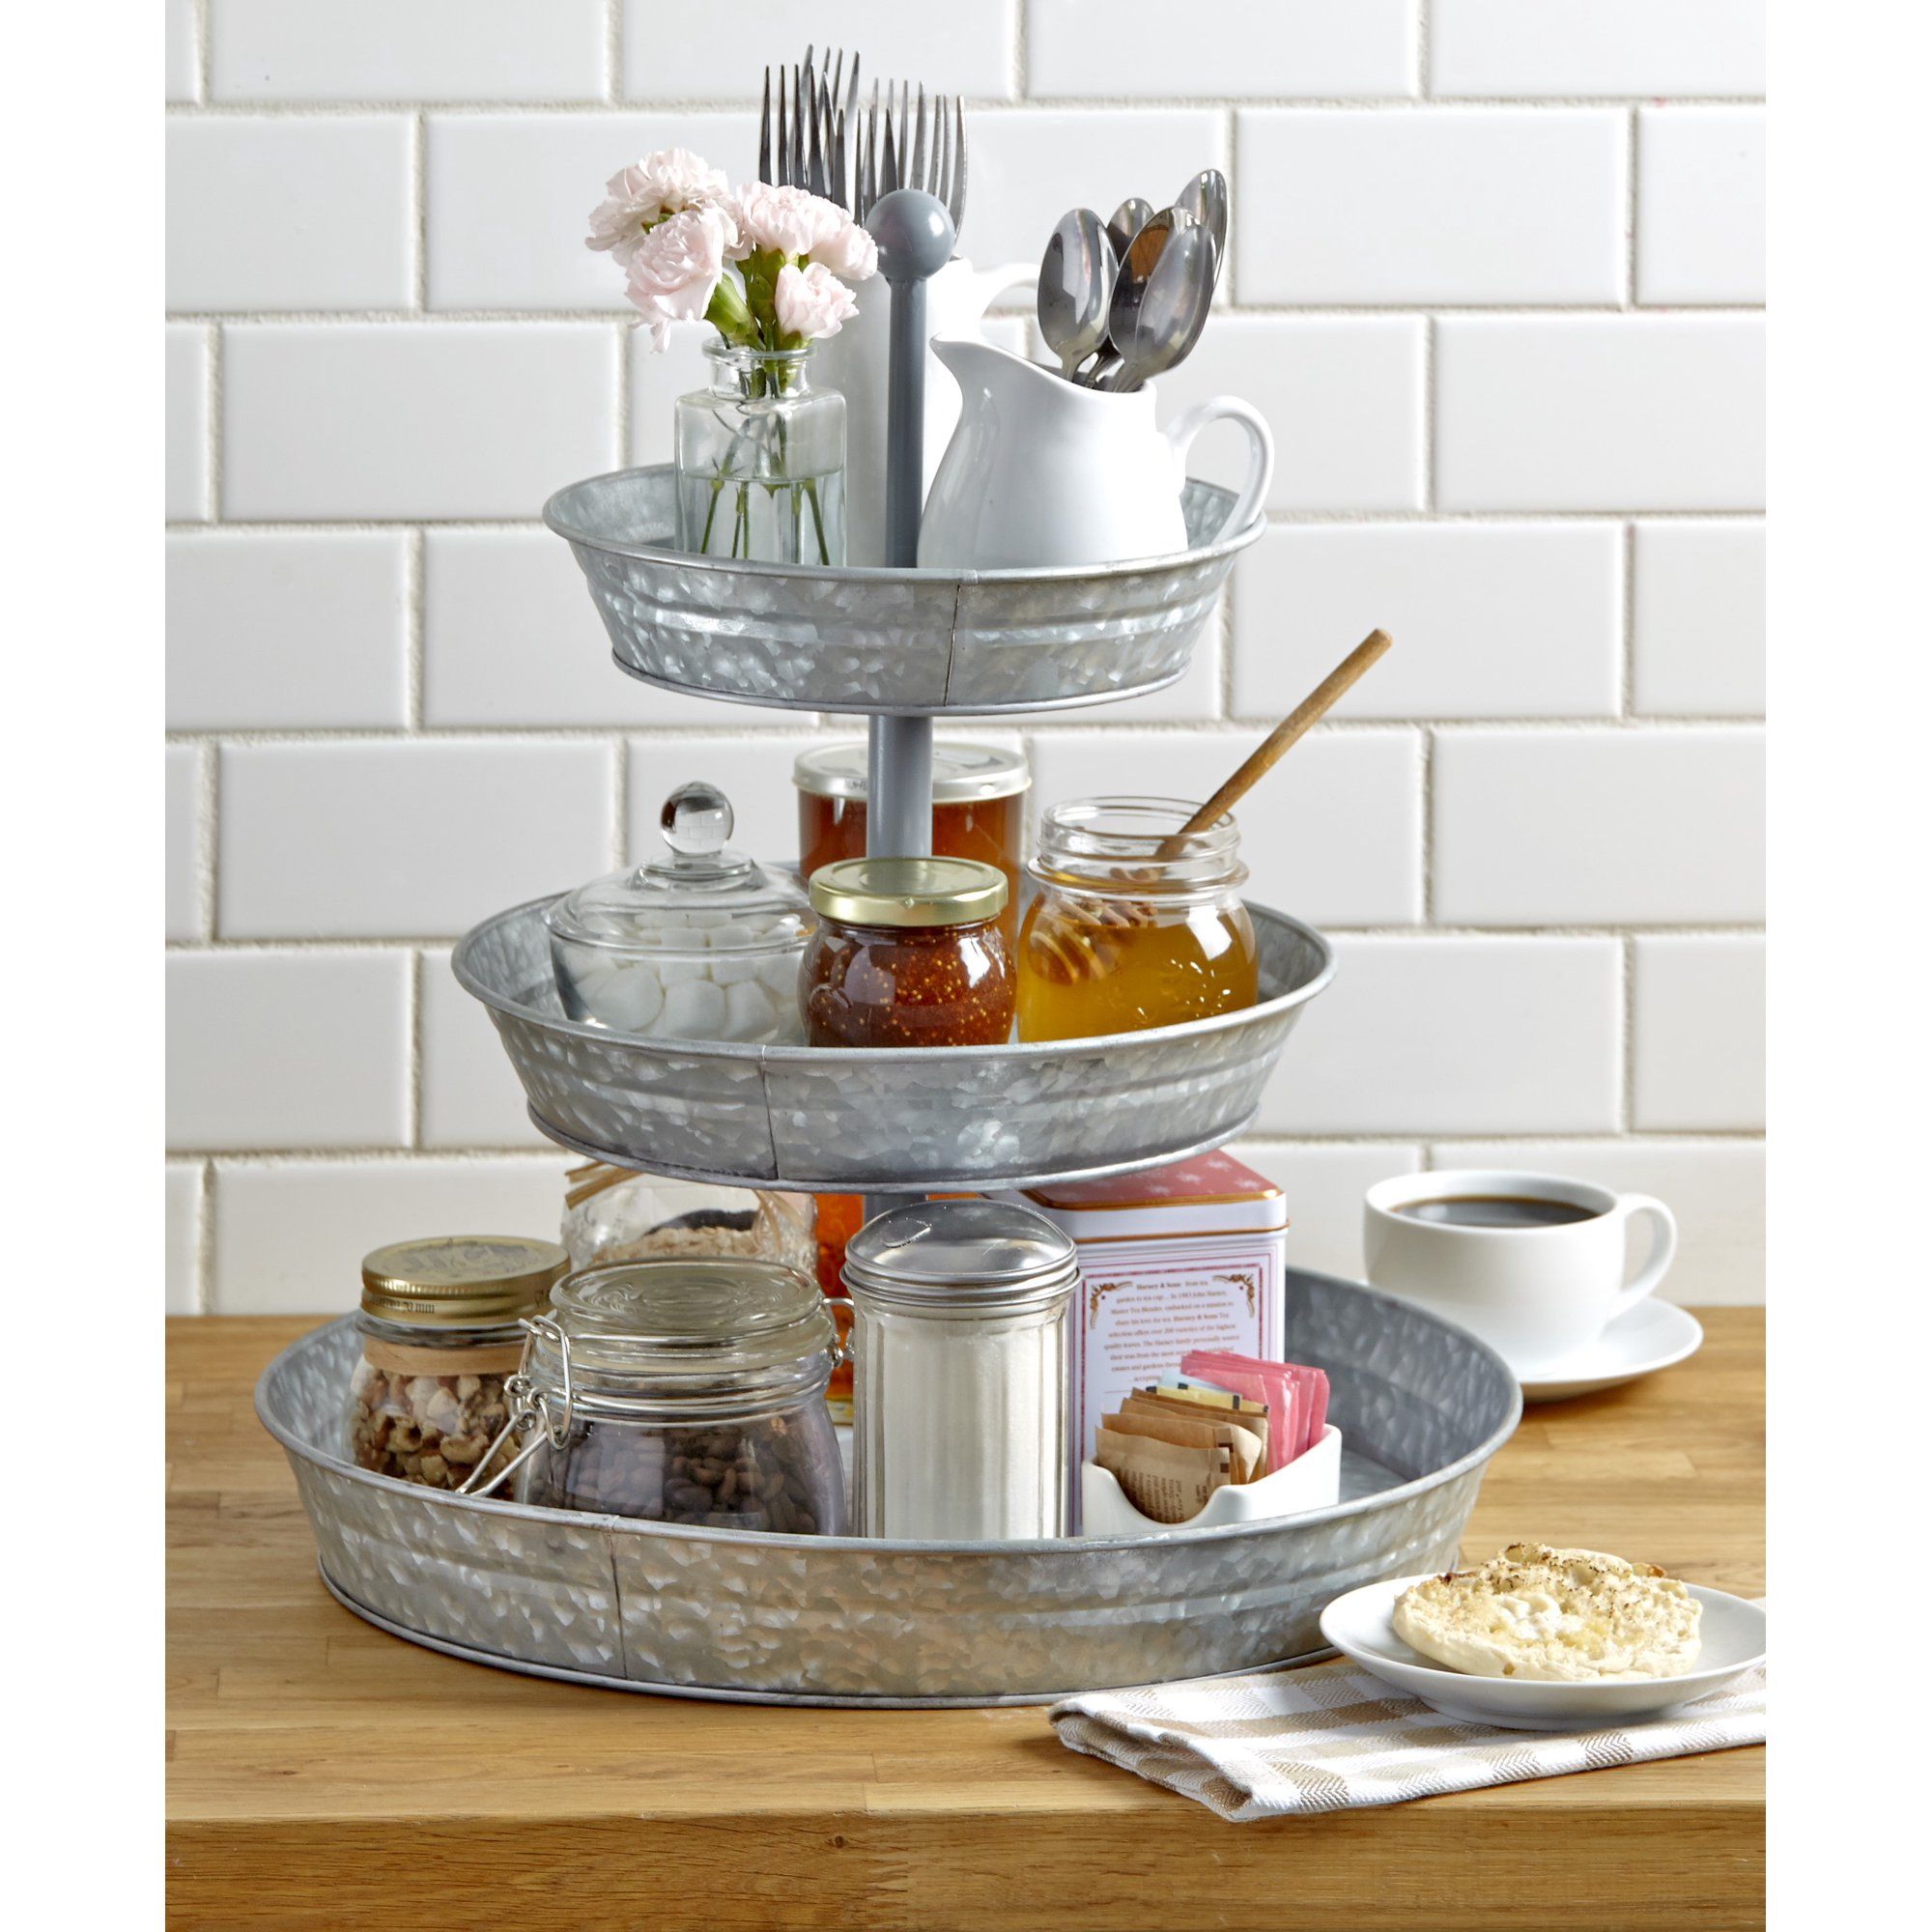 3-Tier Rustic Kitchen Stand - Galvanized Metal Kitchen Tray with Farmhouse Style | Walmart (US)